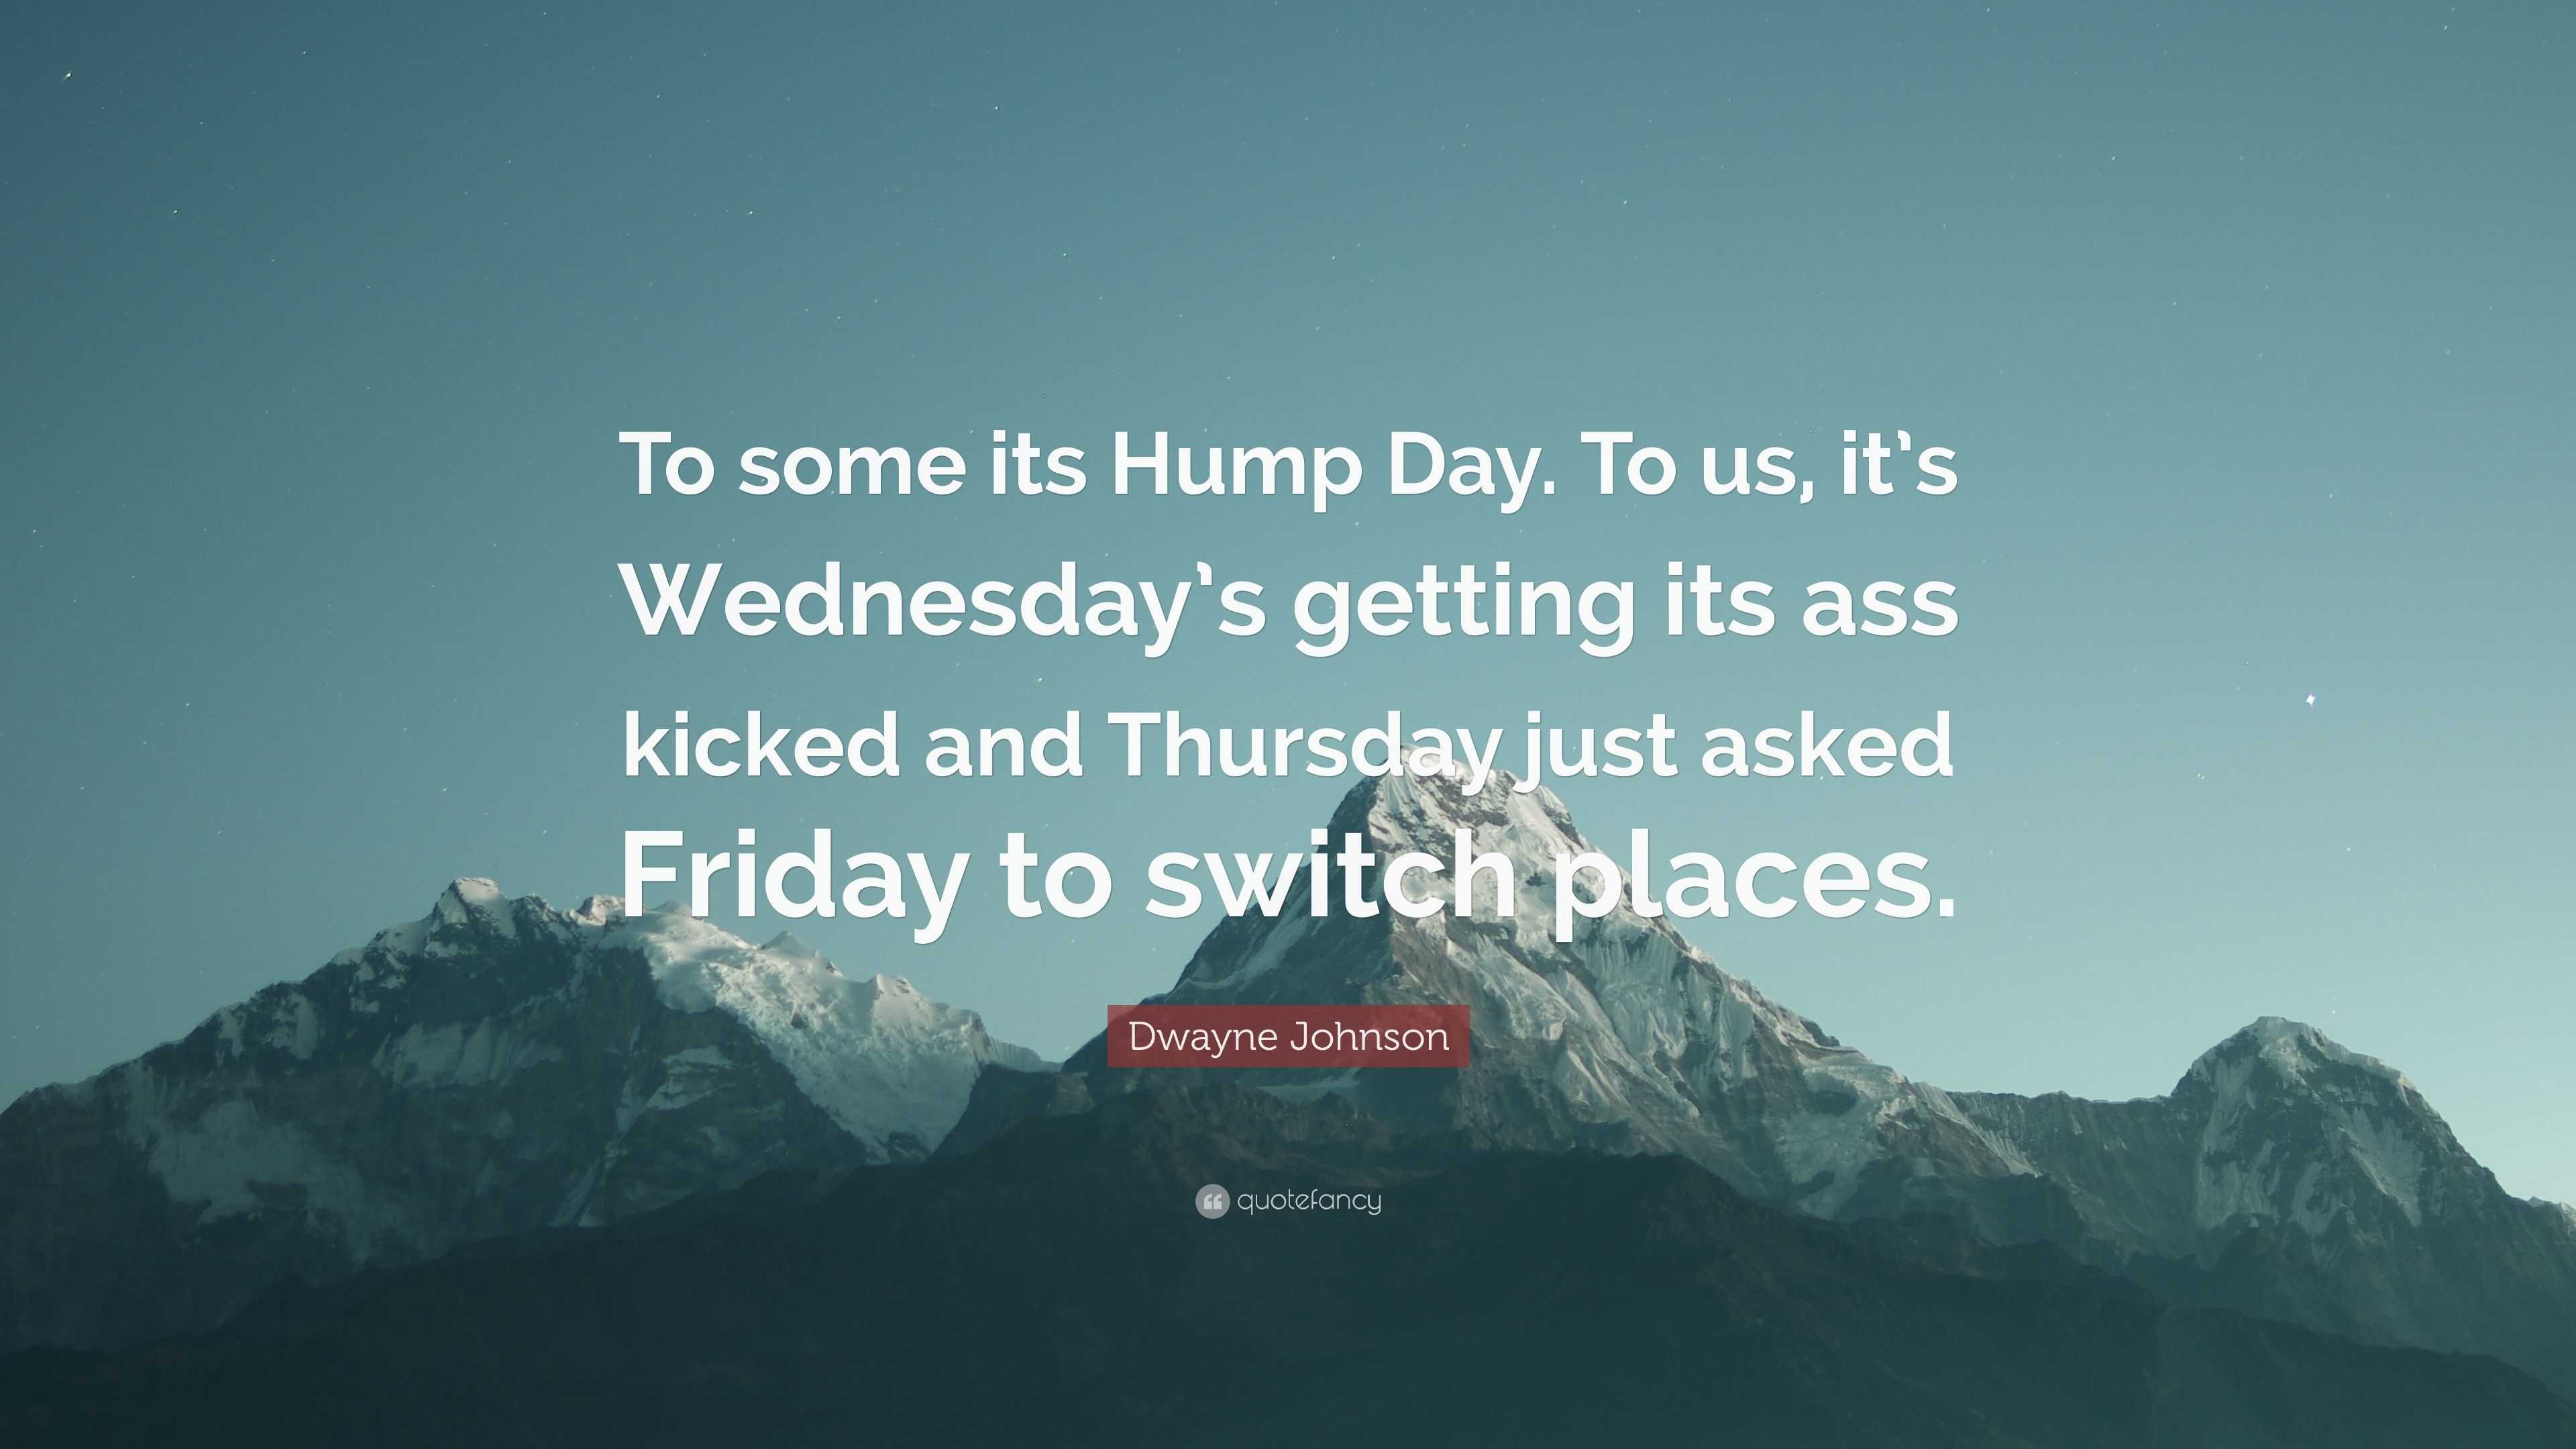 Dwayne Johnson Quote: “To some its Hump Day. To us, it's